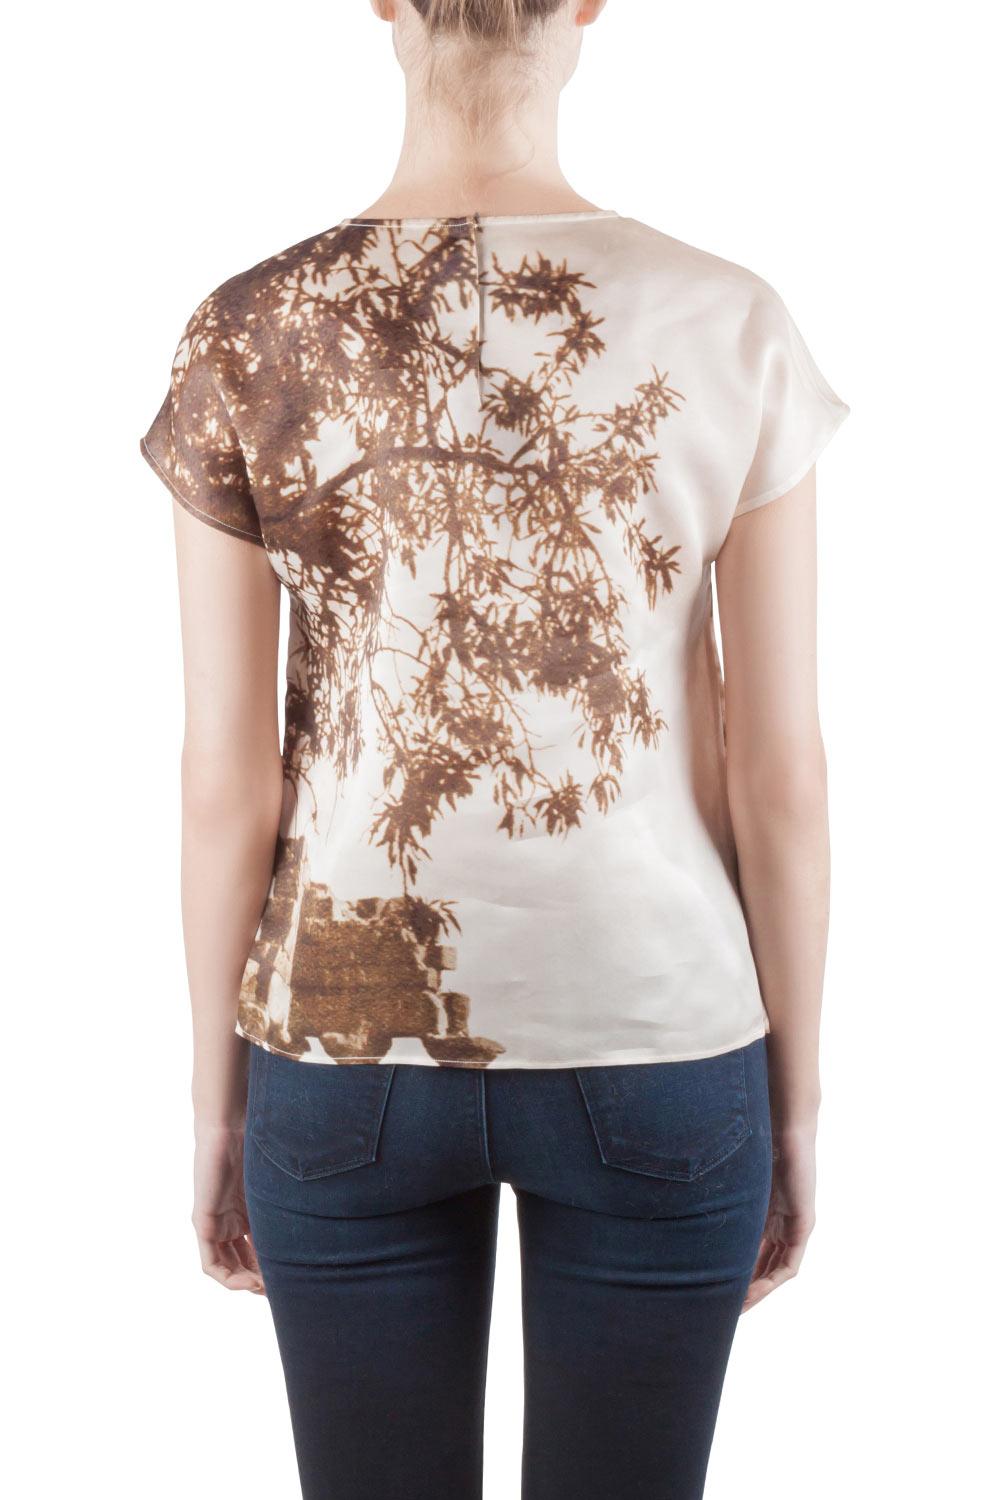 Create a new look with this Boxy blouse from the house of Dolce & Gabbana. Tailored from silk, it is covered in a sepia brown ruins pattern. It features a round neckline and short sleeves, a great piece to add to your casual wear.

Includes: The